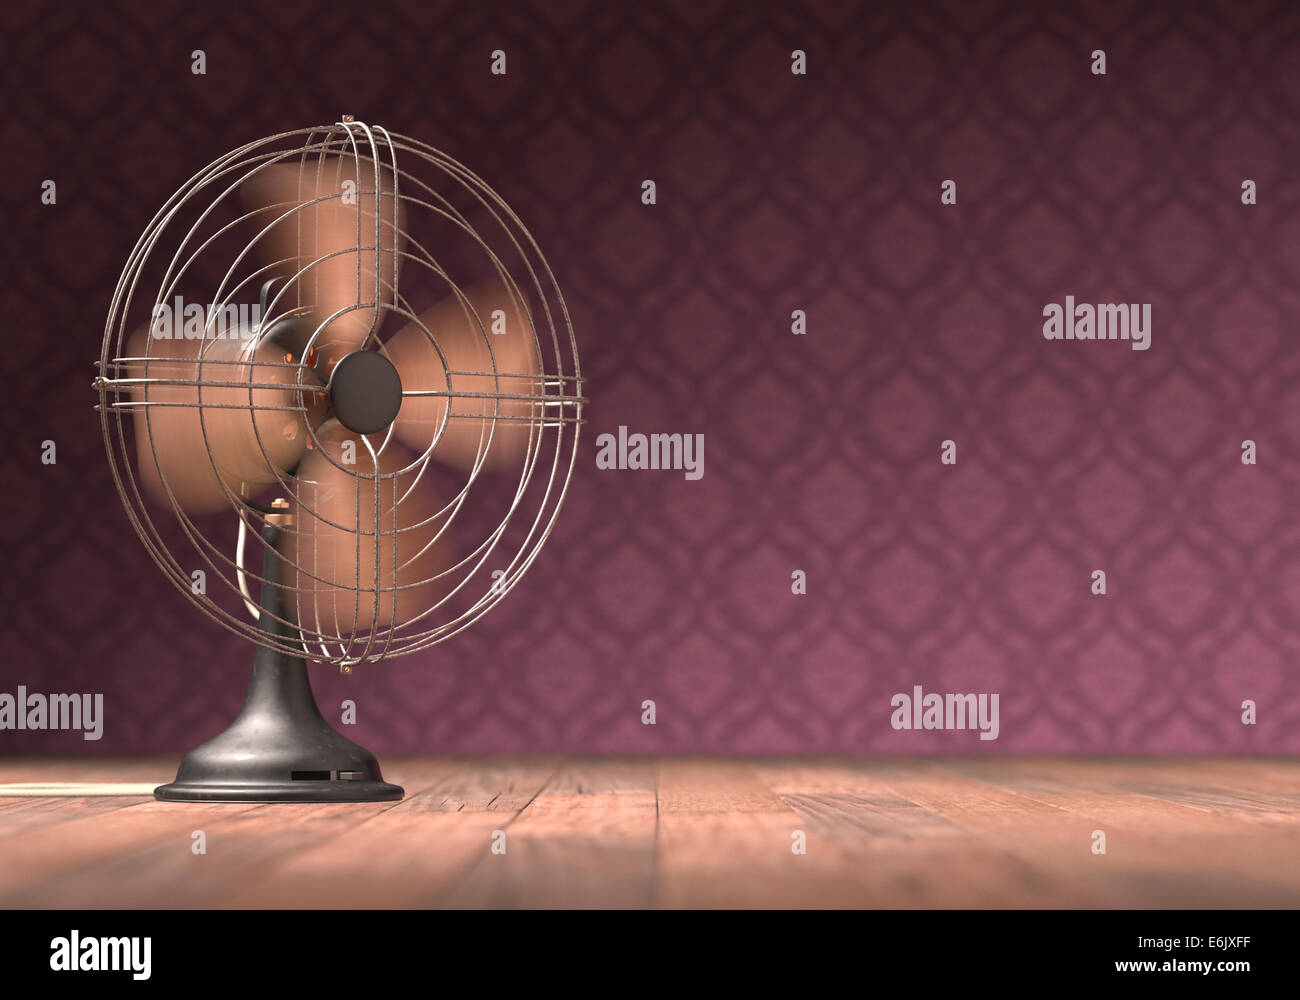 Old antique fan on a wooden floor with retro background. Stock Photo